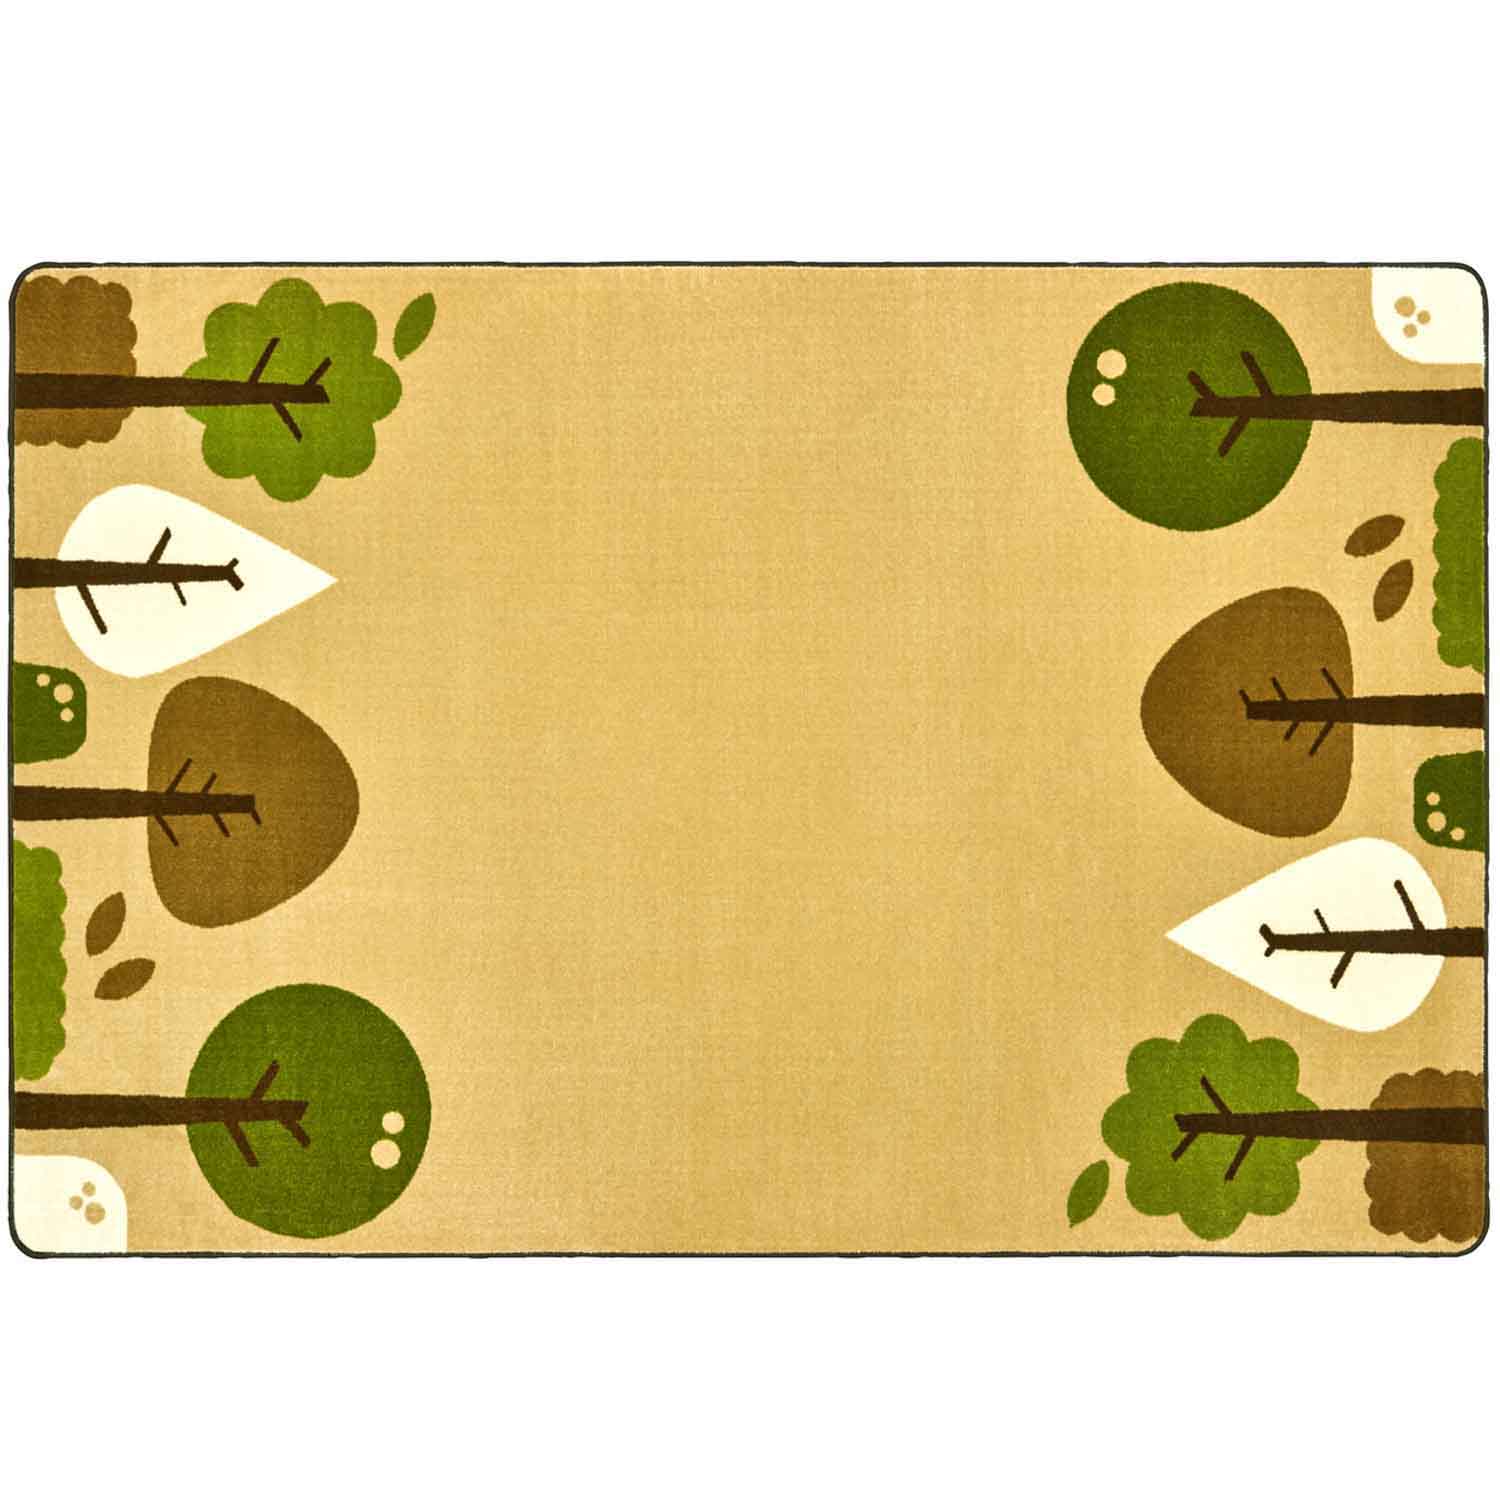 KIDSoft™ Tranquil Trees Rug, Tan, Rectangle 7' 6" x 12'